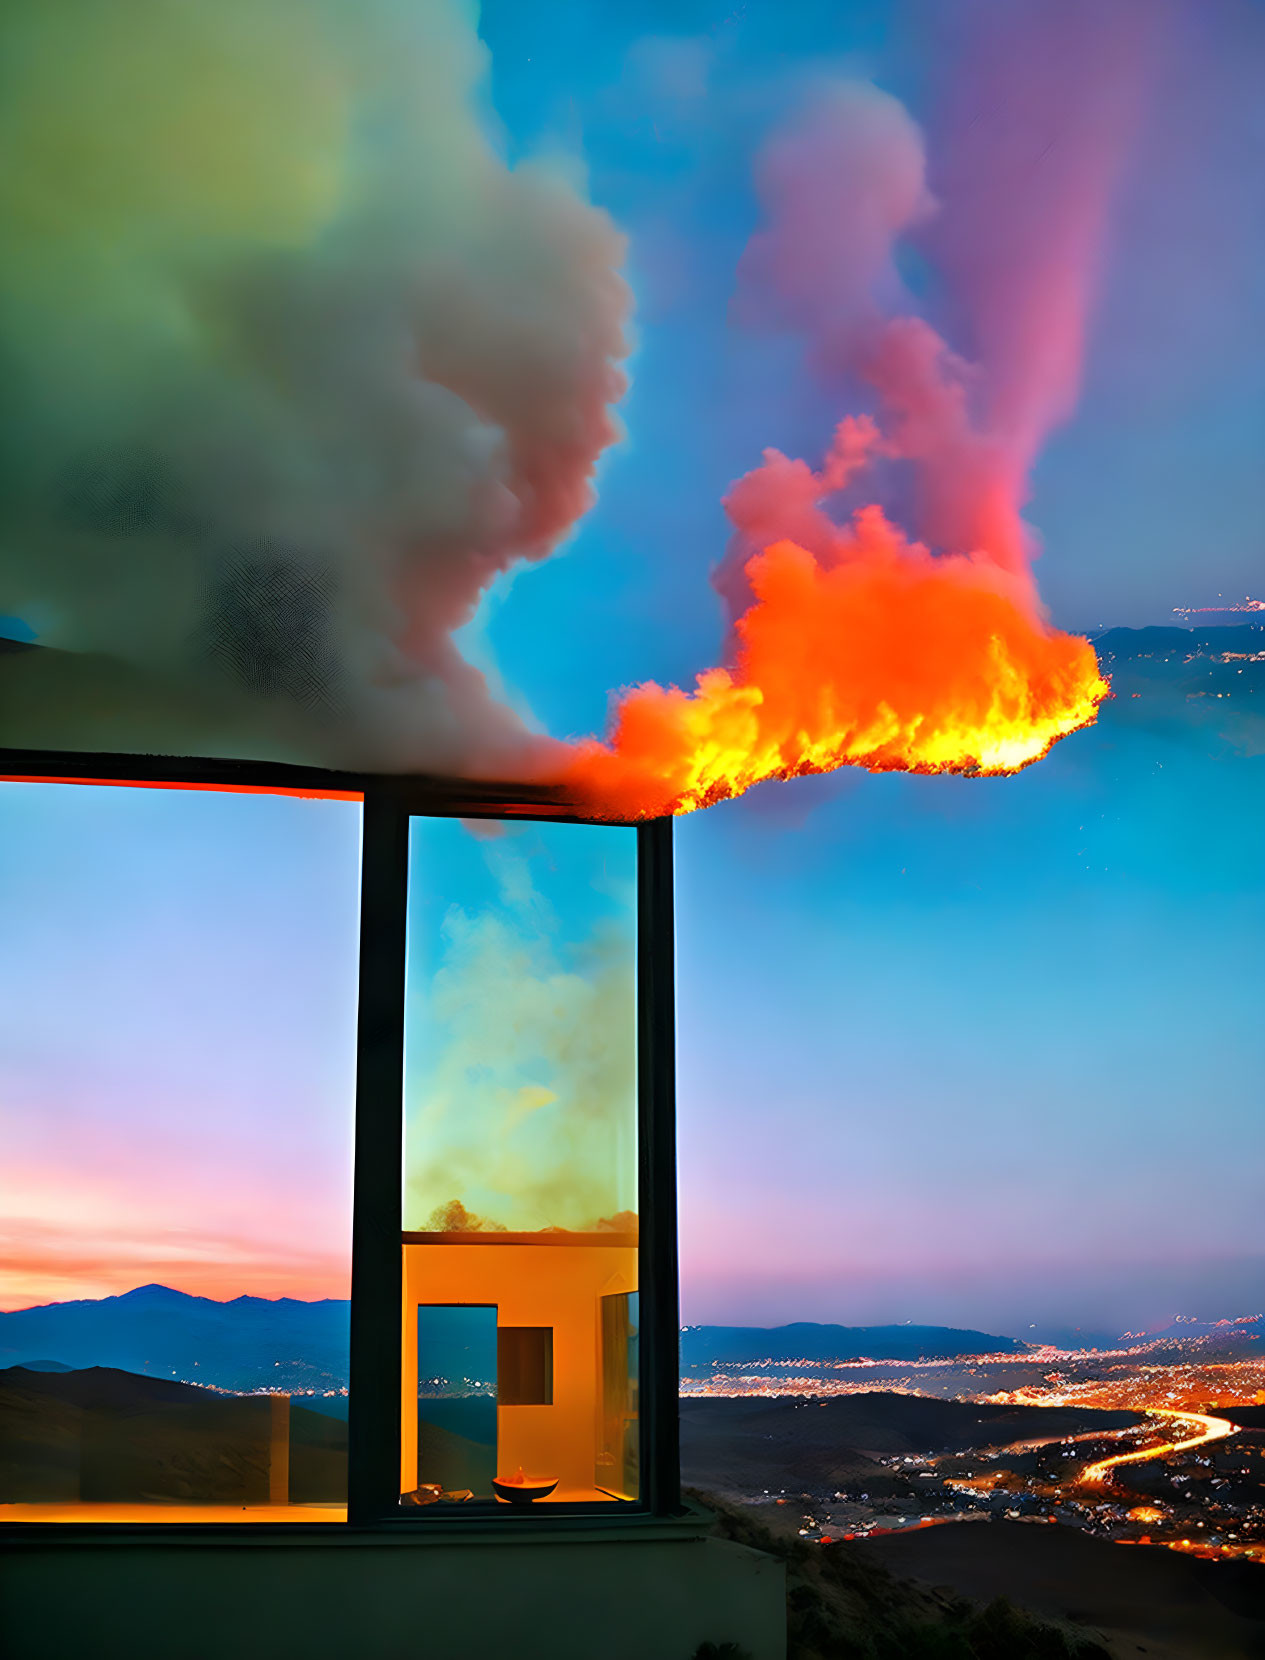 Glass balcony overlooking twilight cityscape with surreal burst of flame